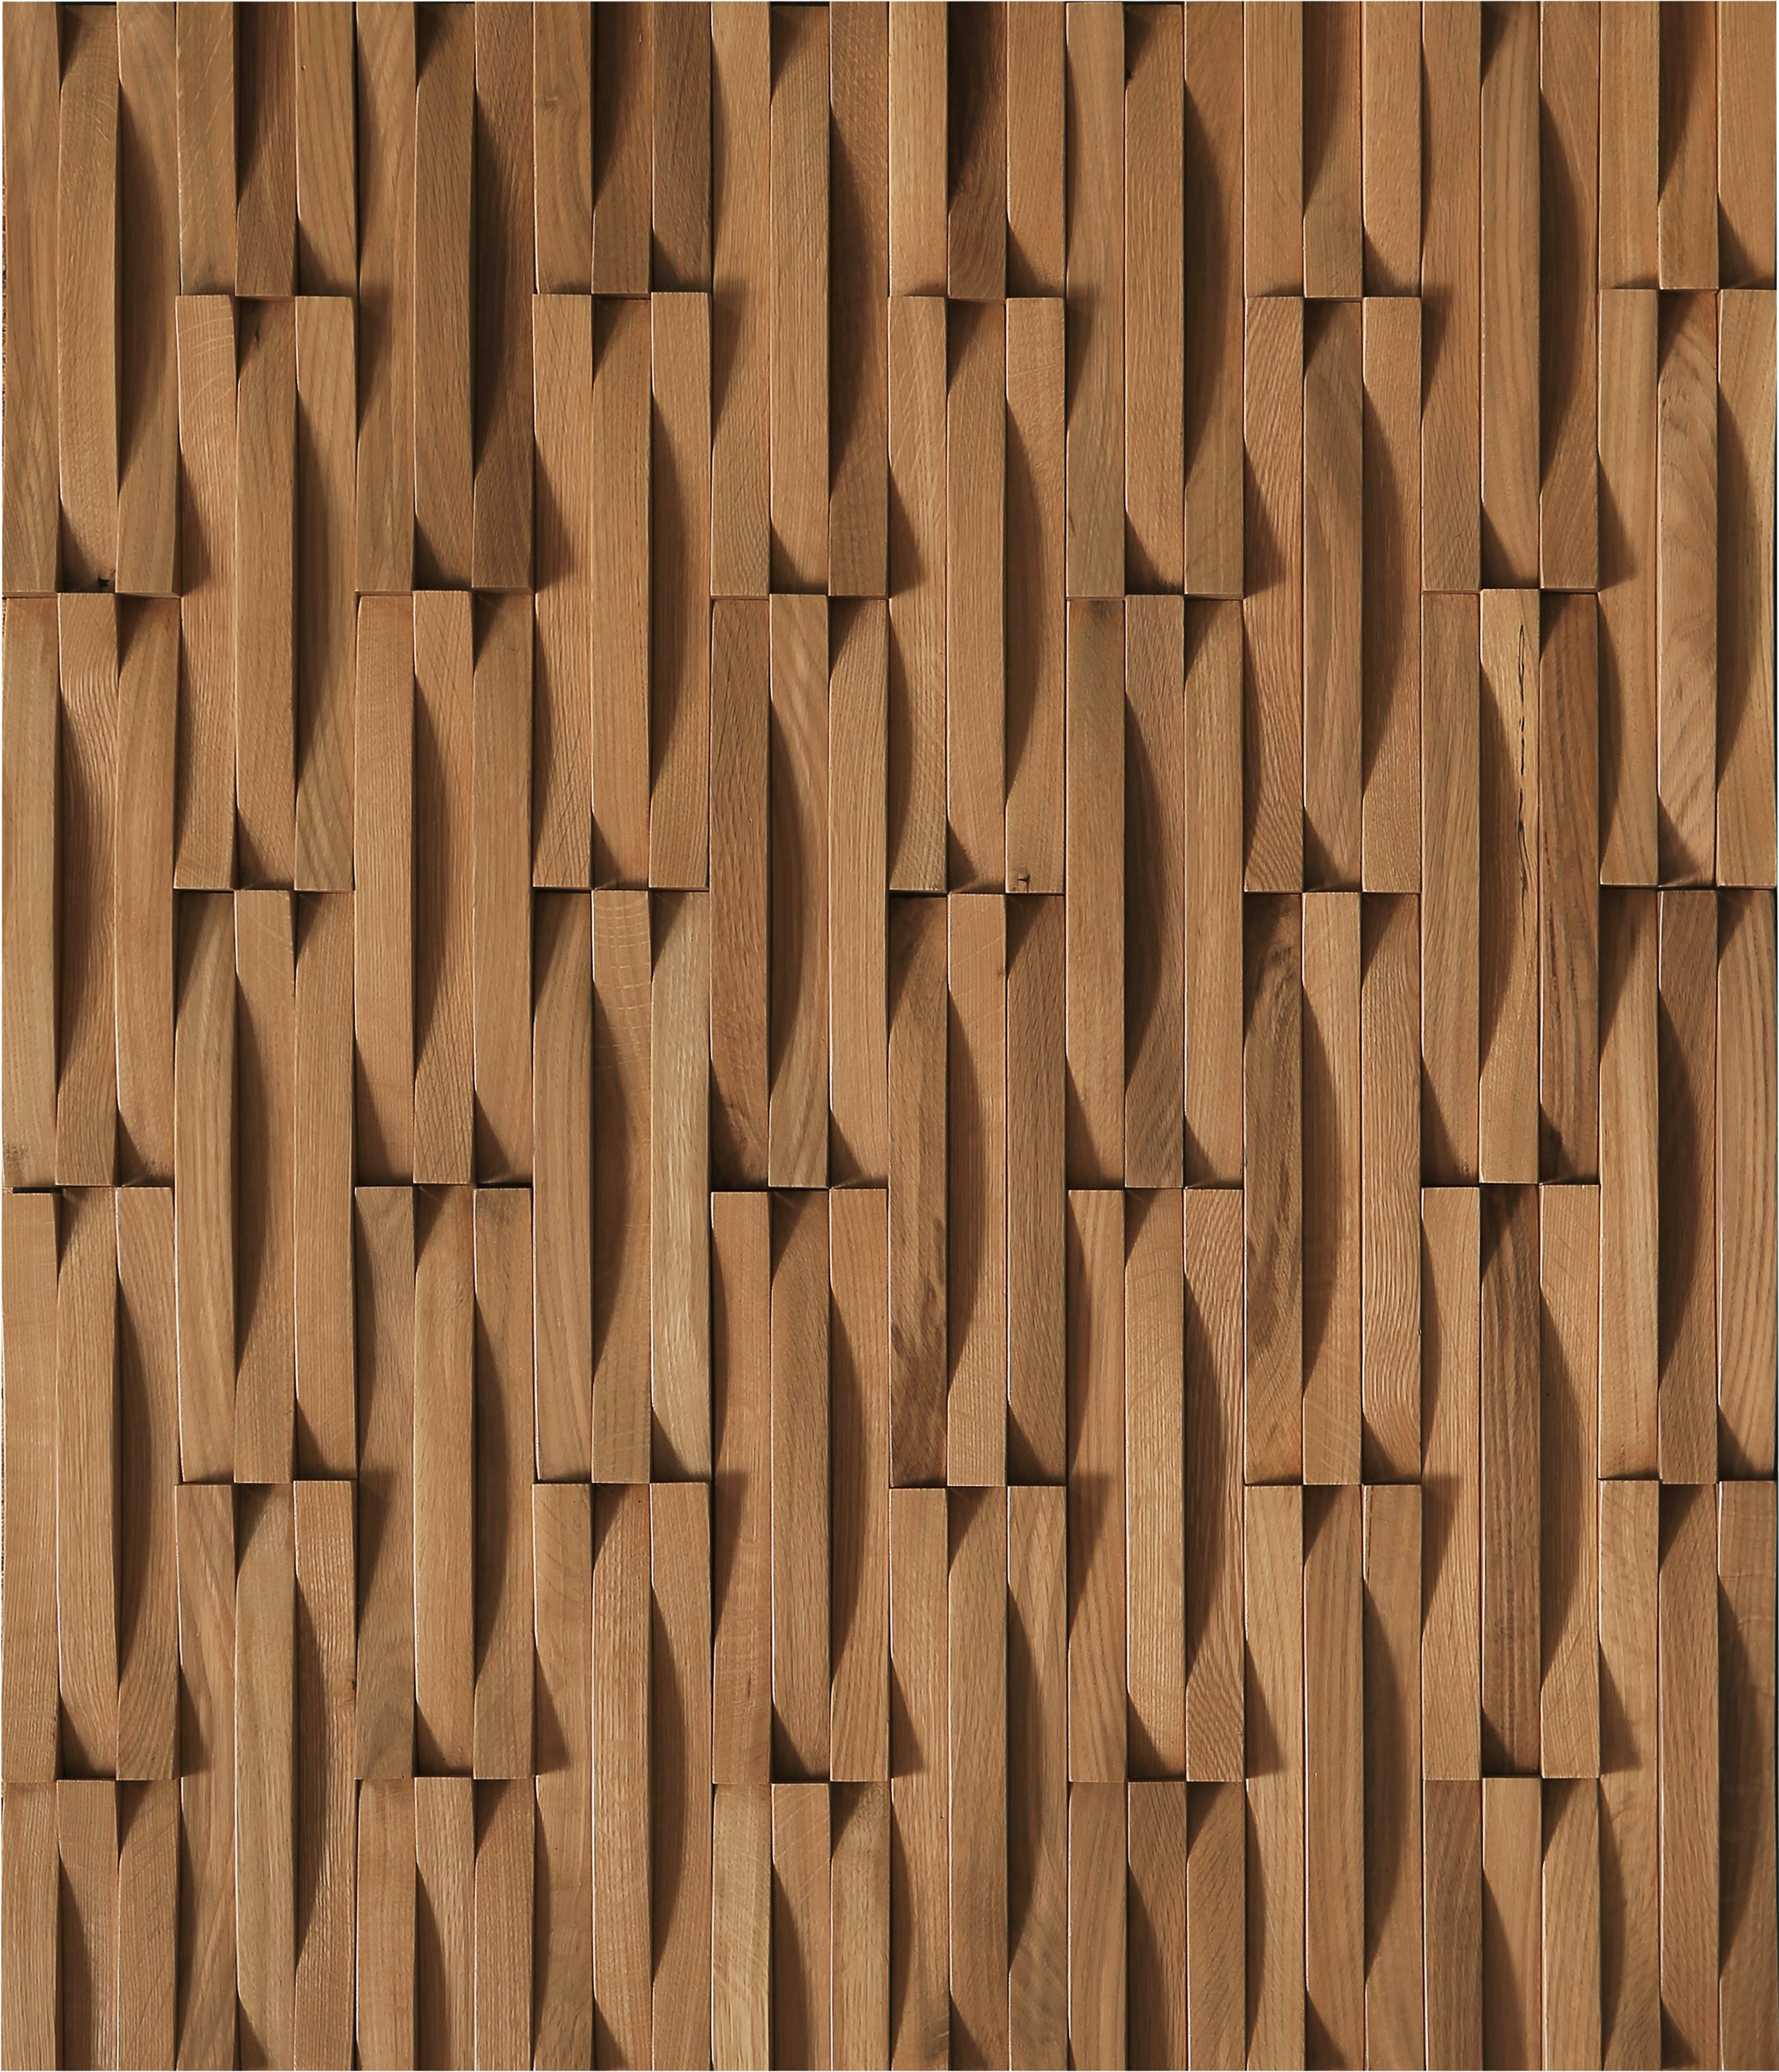 duchateau inceptiv krescent olde dutch oak three dimensional wall natural wood panel lacquer for interior use distributed by surface group international